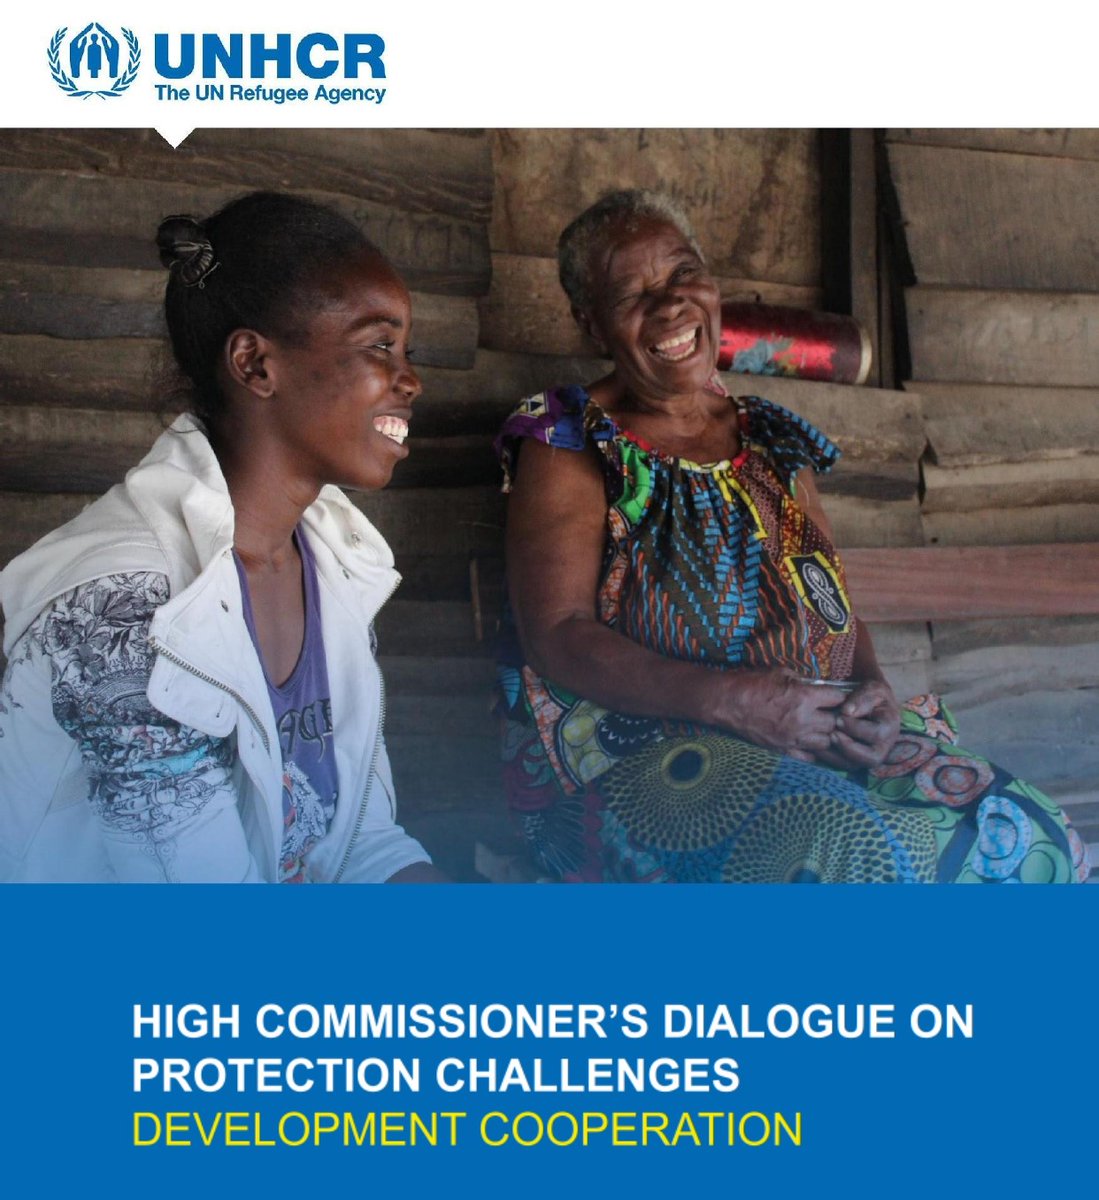 We are @Refugees High Commissioner's Dialogue 
@VilleDeGeneve to reflect on avenues for dev. cooperation aimed at protection & inclusion of #displaced & stateless persons, a key priority for #Localgov w/ #LampedusaCharter
Forced displacement & statelessness are #NotABorderTale